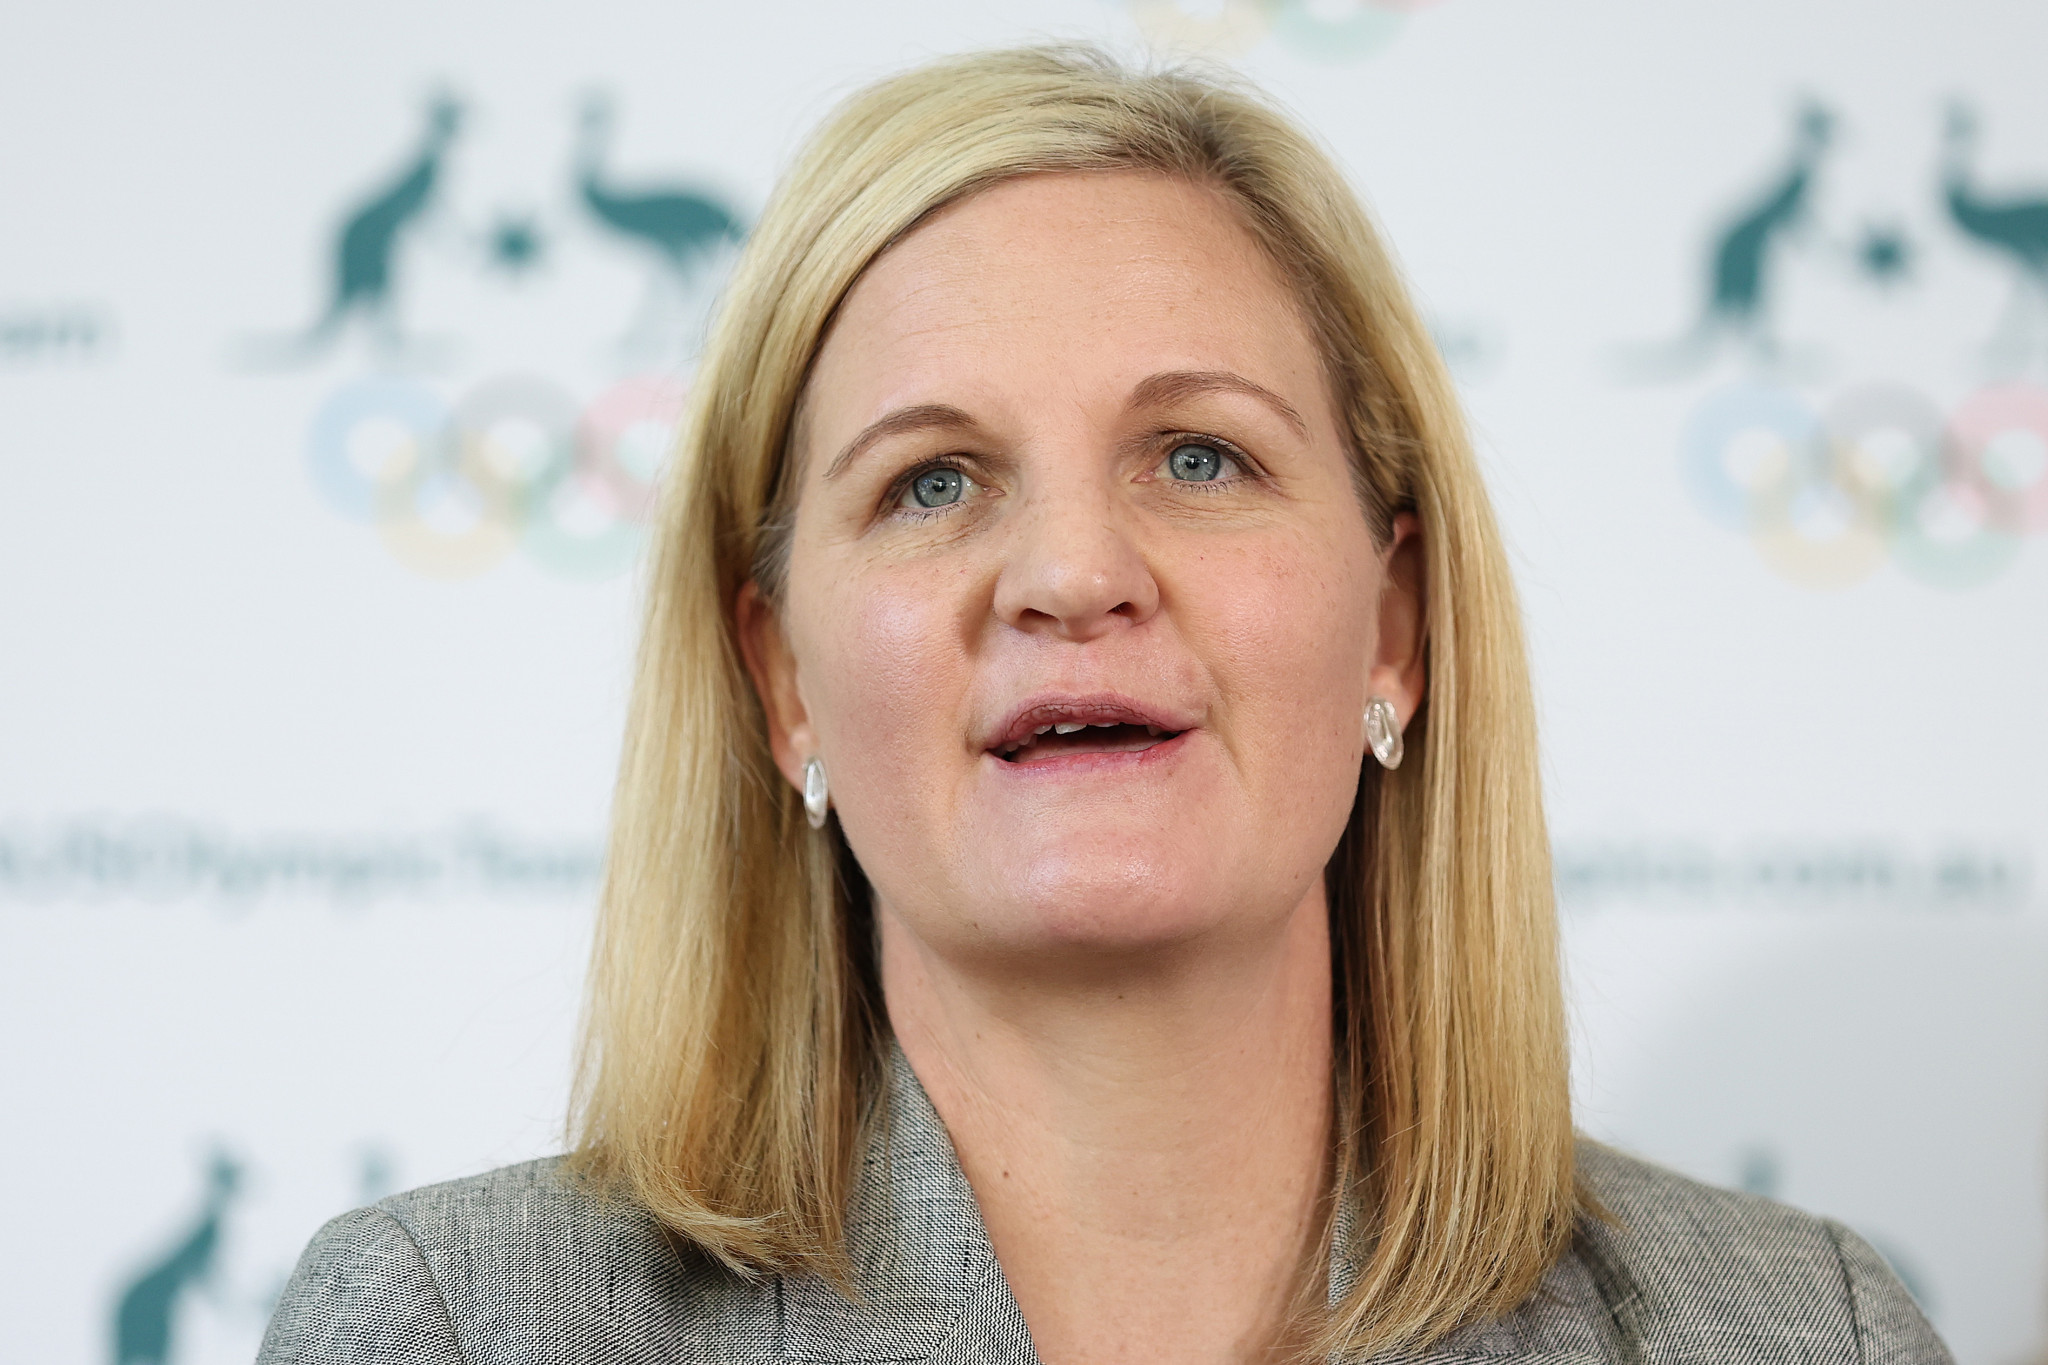 Brisbane 2032 Coordination Commission chair Kirsty Coventry is heading up the IOC's new Games Optimisation Working Group ©Getty Images